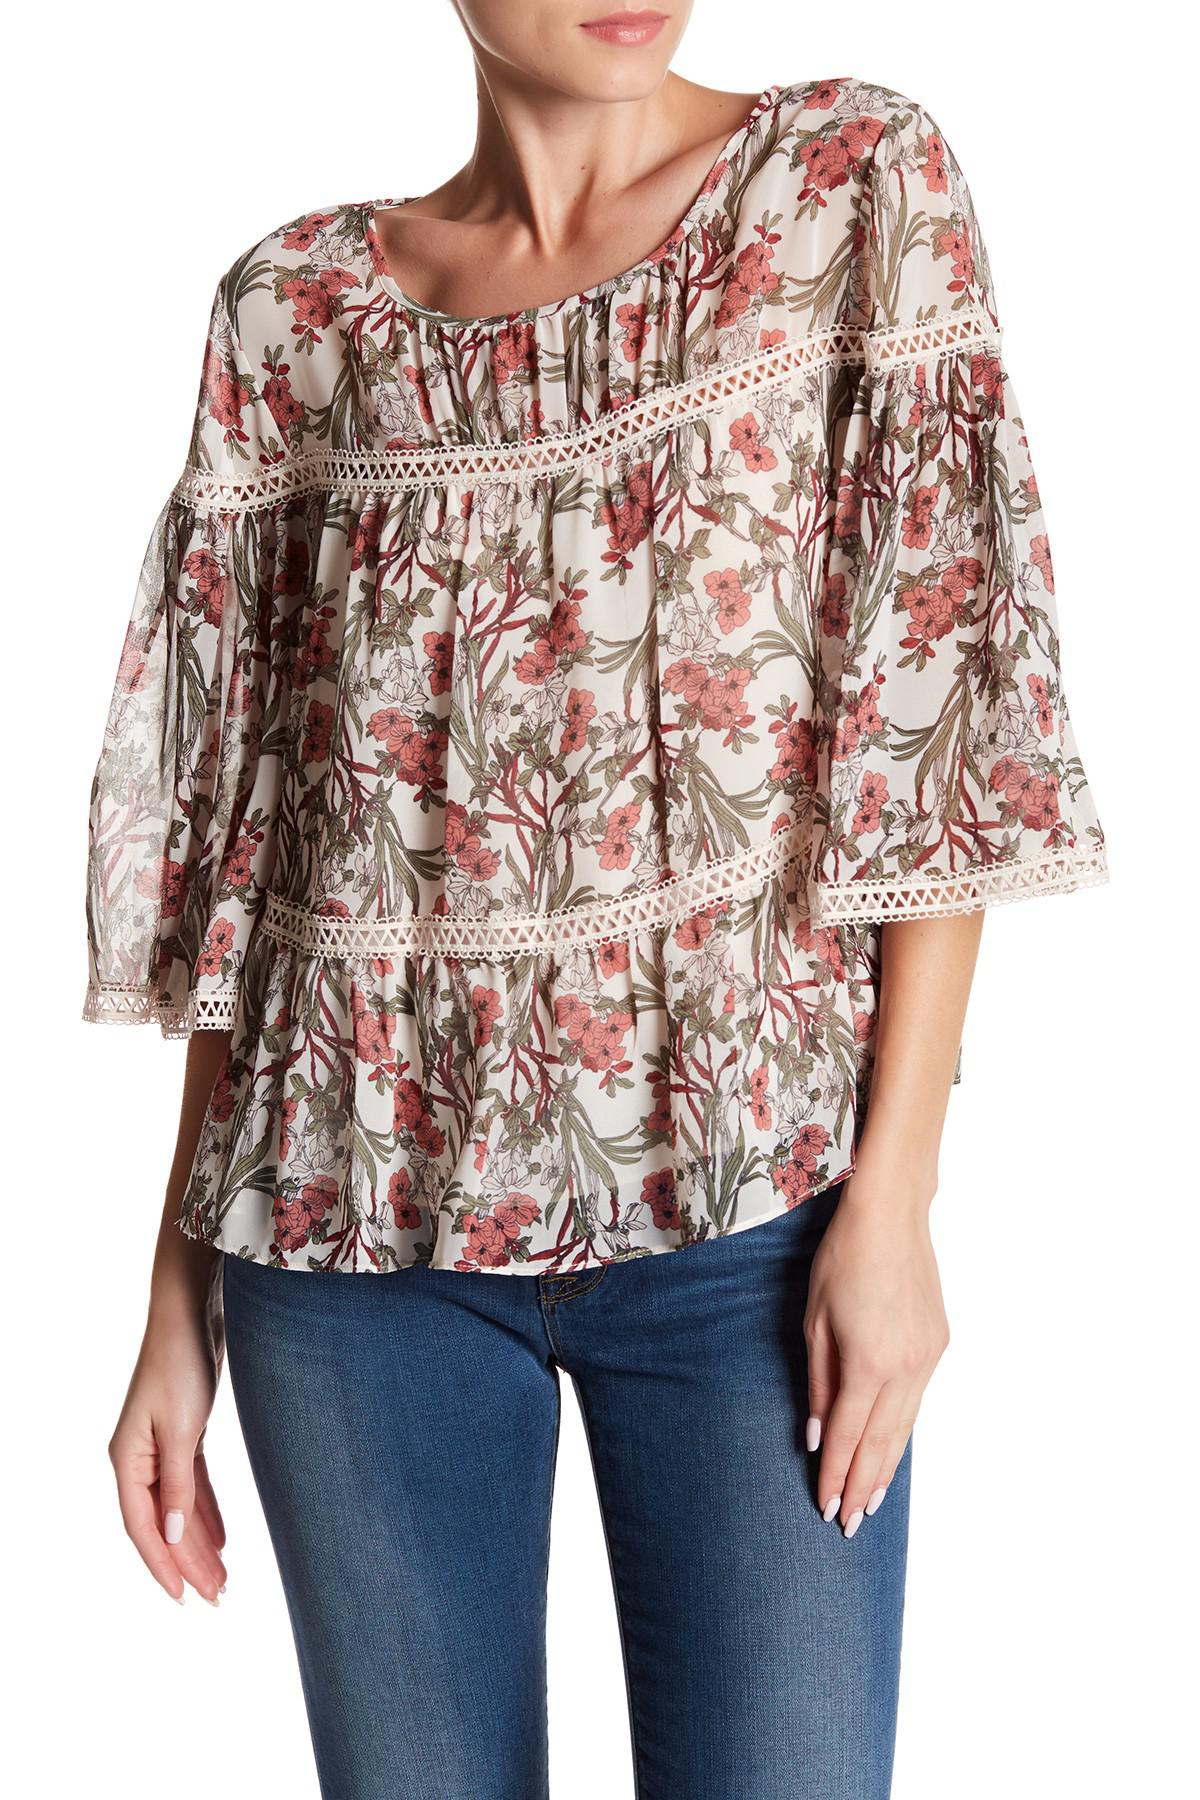 Lyst - Max Studio Floral Bell Sleeve Blouse